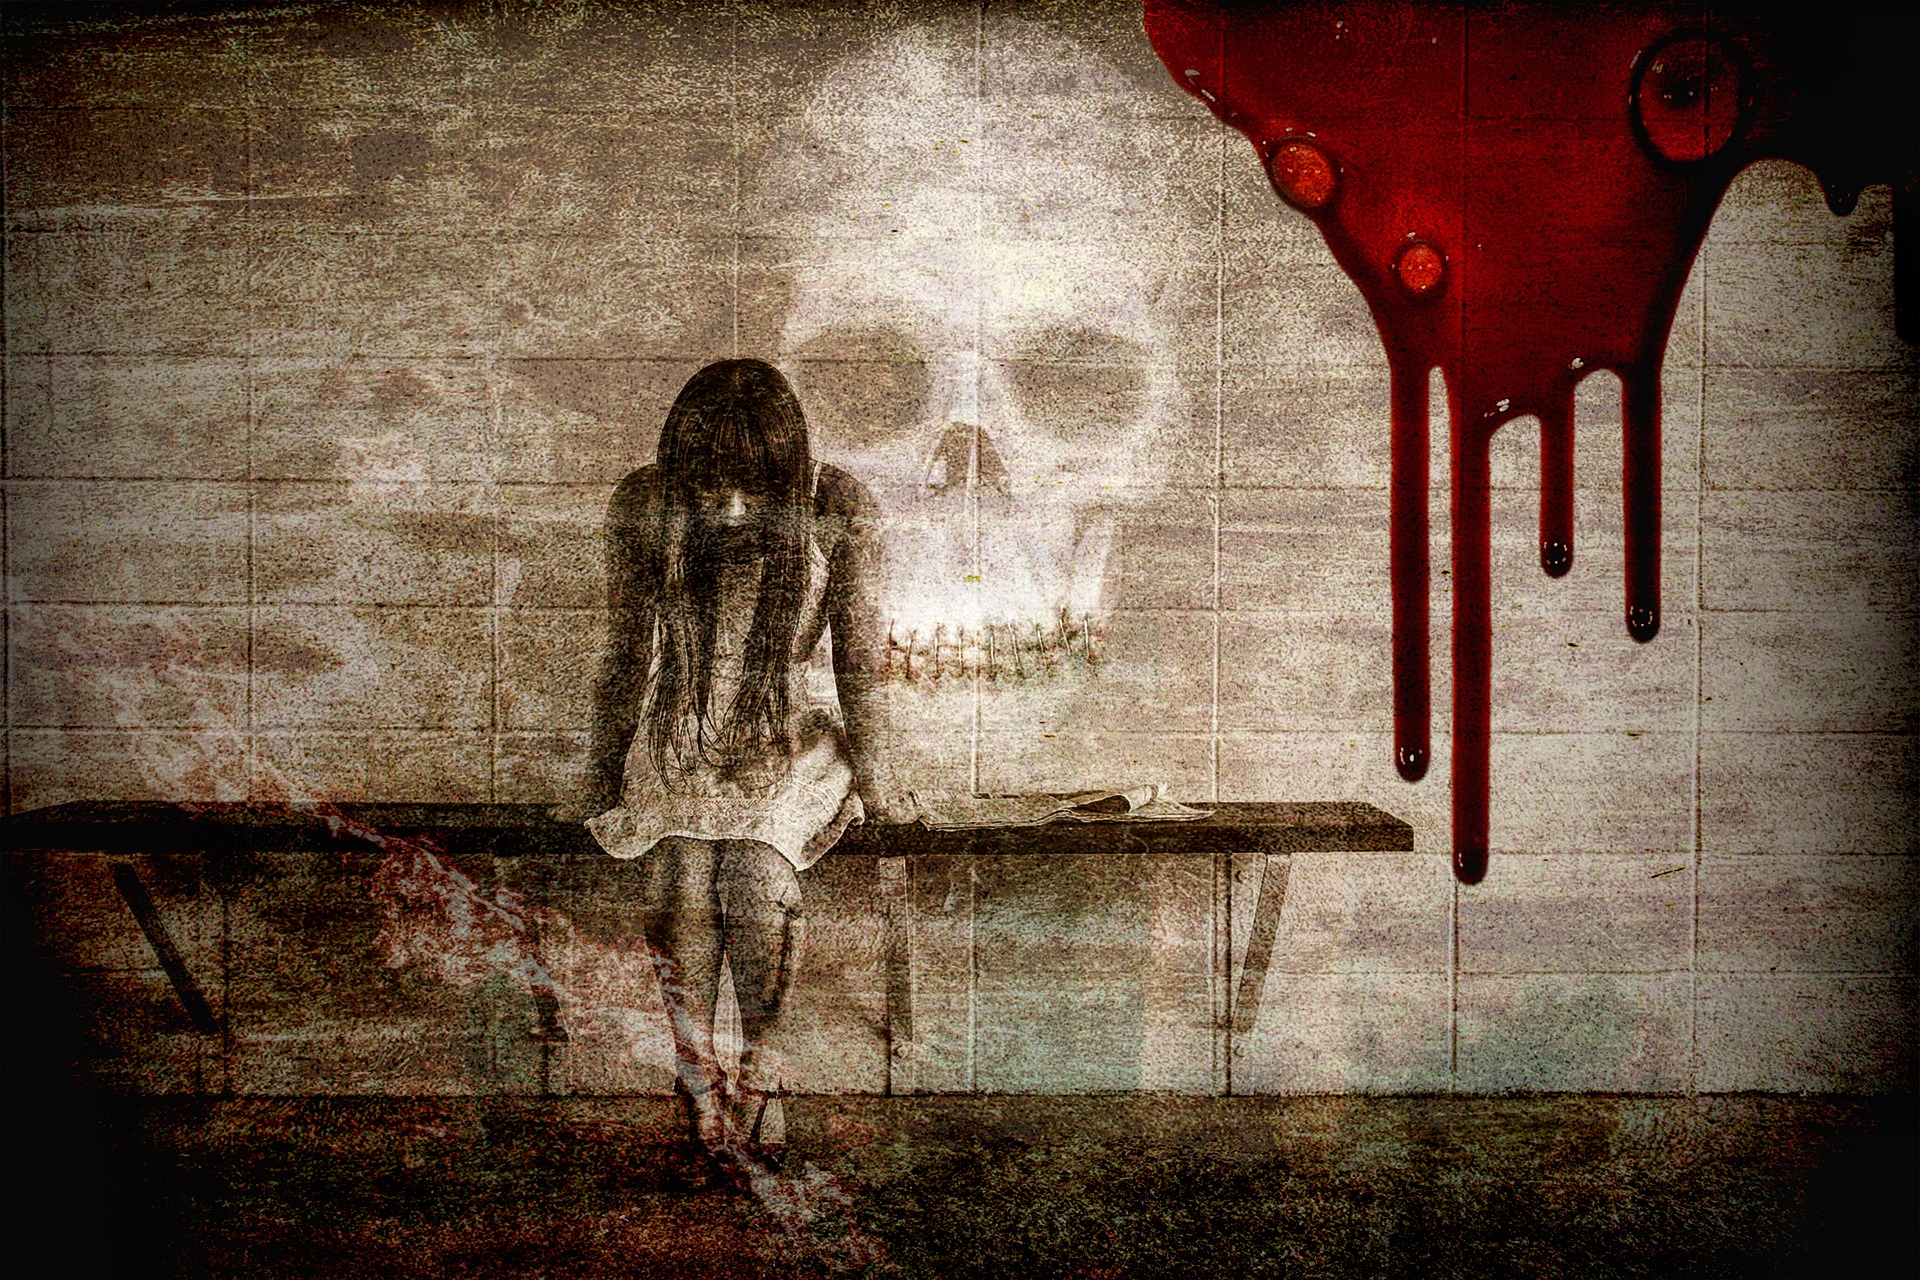 A young woman in a white dress sits on a bench alone. Her head is downcast. A skull image is on the wall behind her, as is some blood. The image has a faded appearance apart from the blood.